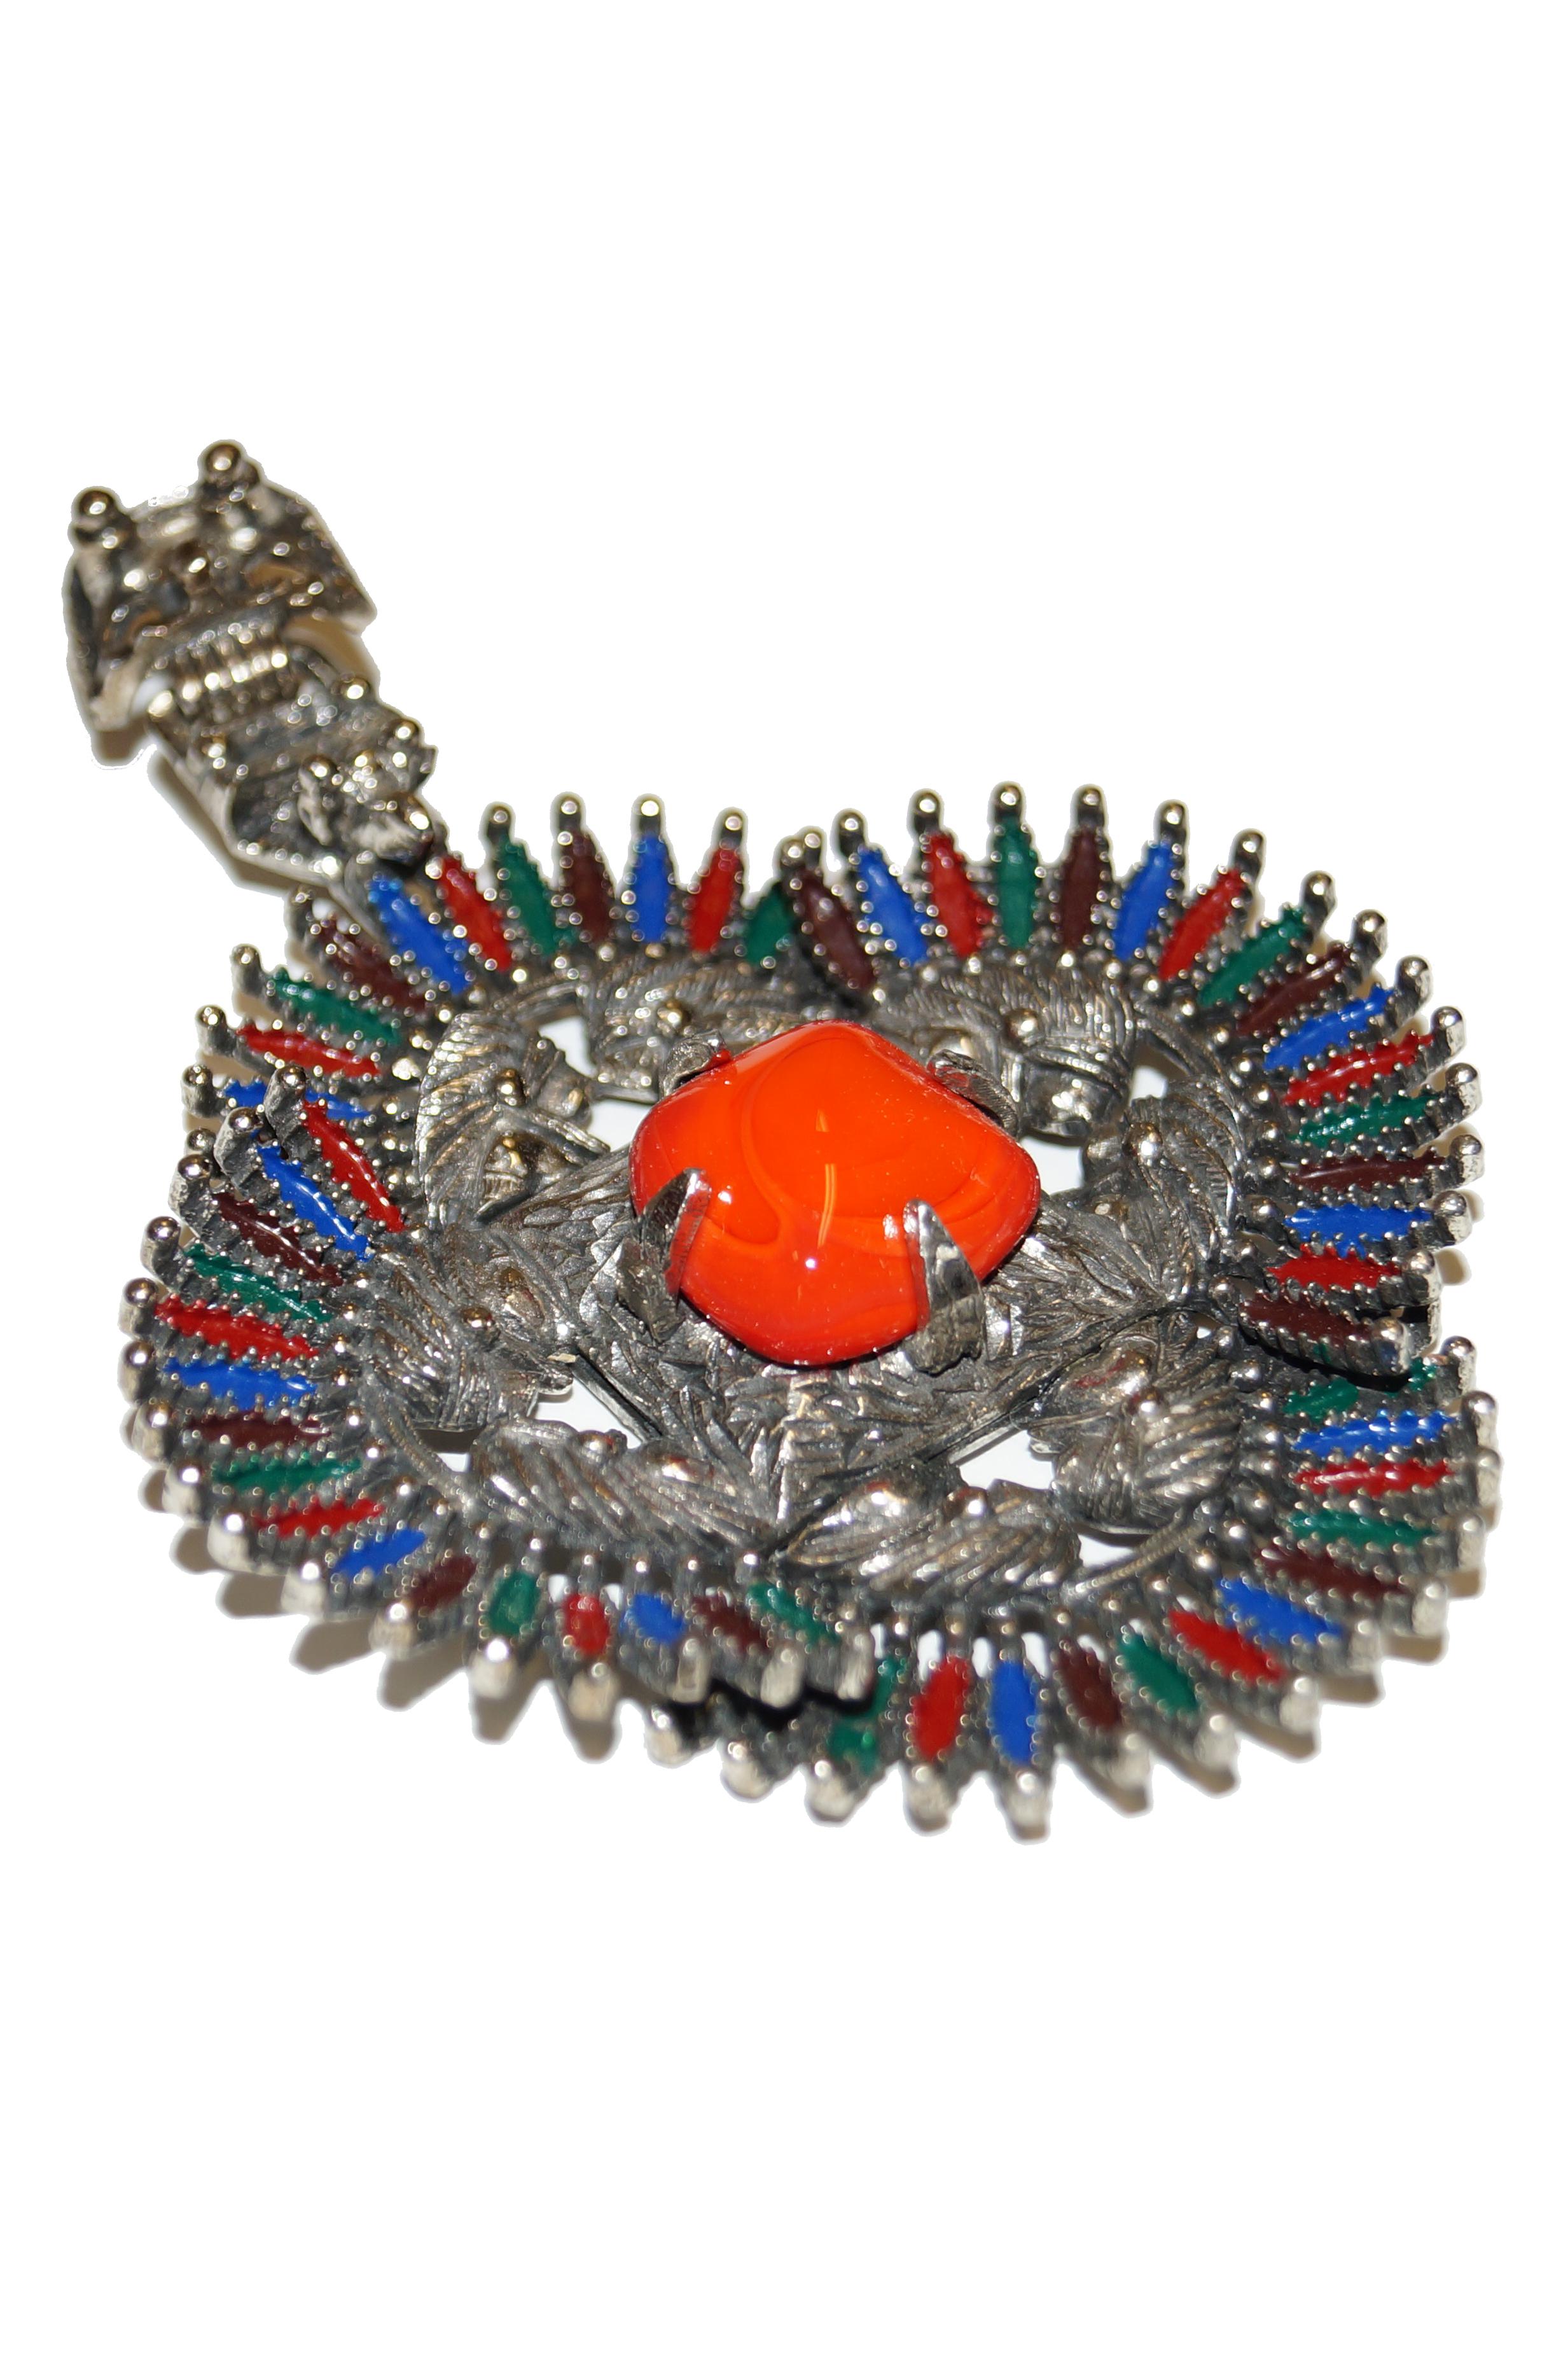 Amazing Mayan  - inspired medallion by Larry Vrba for Castlecliff! This pendant features a brilliant red-orange cabochon center, flanked on all four sides by inward- facing chieftains. The figures are enclosed by long, marquise - cut stones in red,